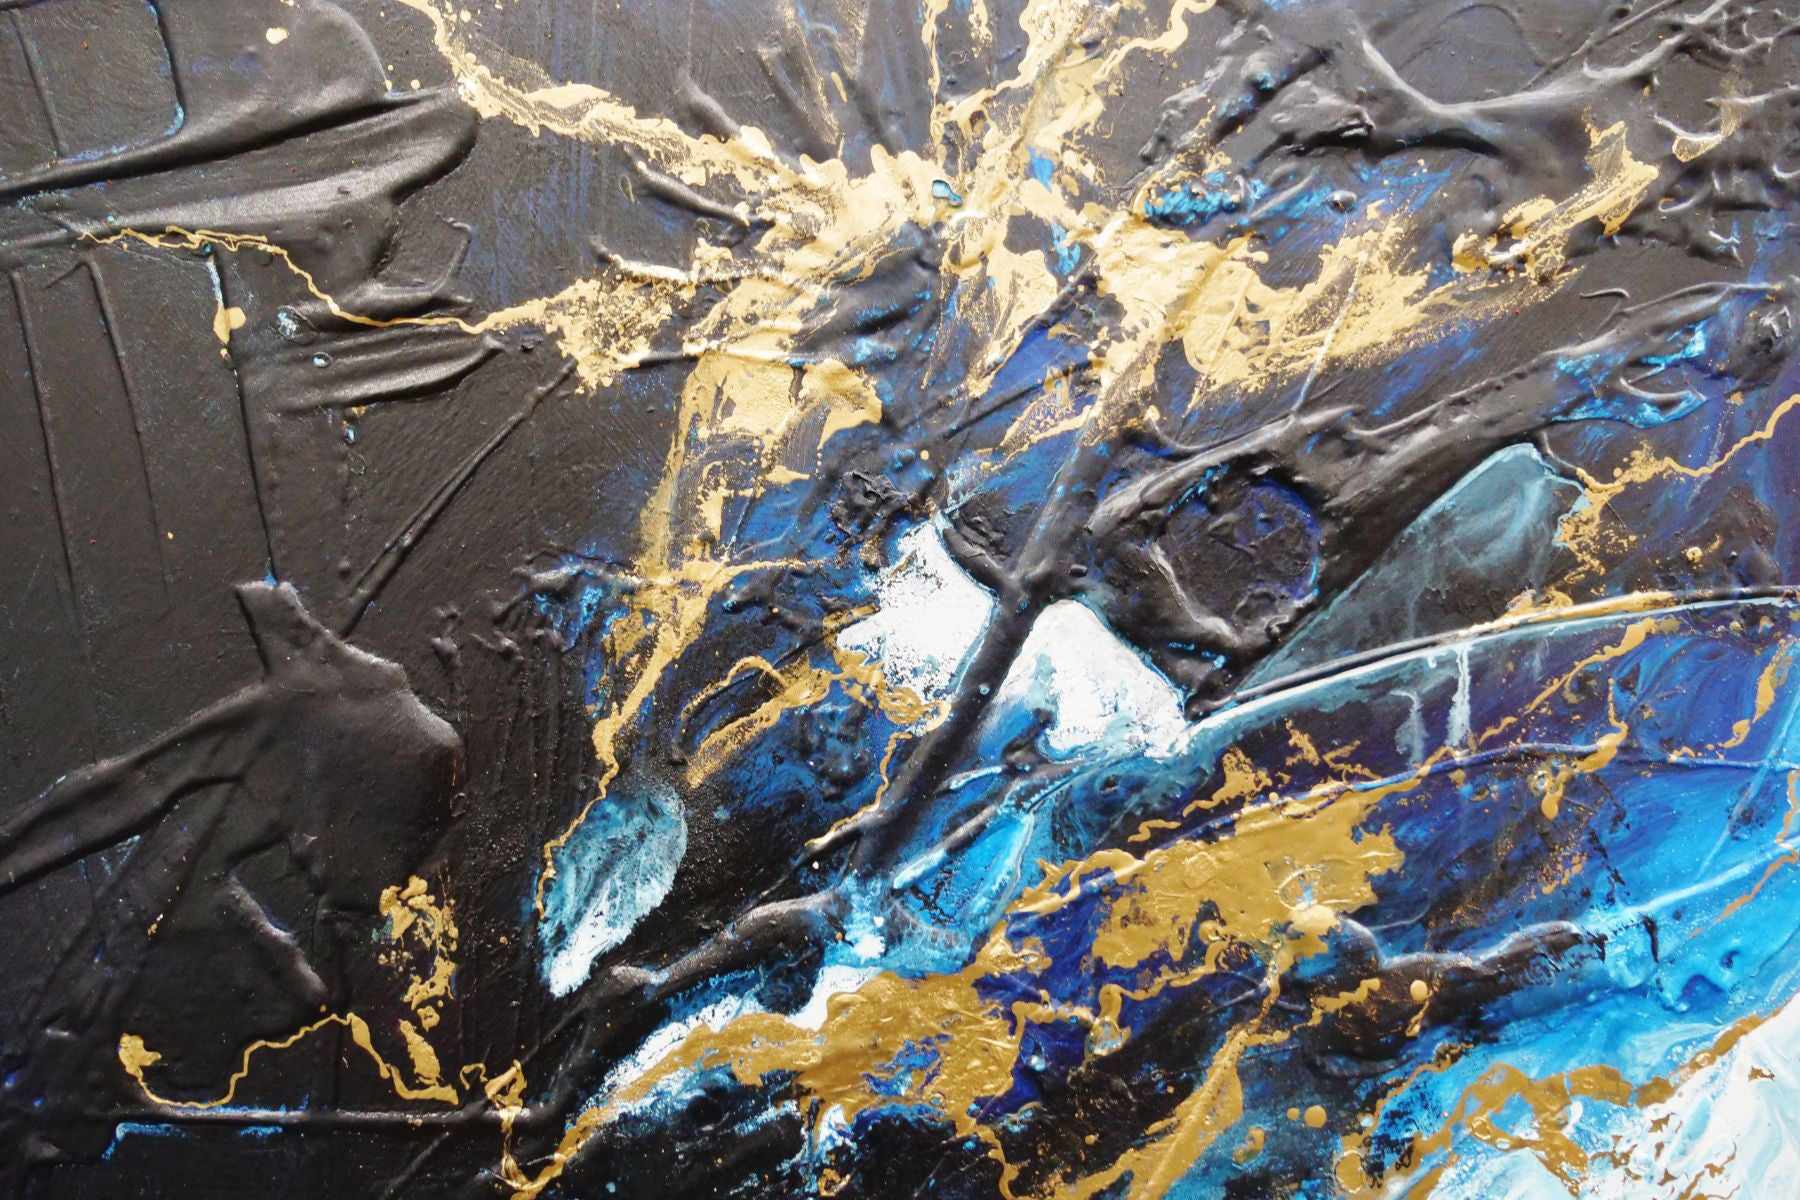 Golden Sapphire 190cm x 100cm Blue Gold Textured Abstract Painting (SOLD)